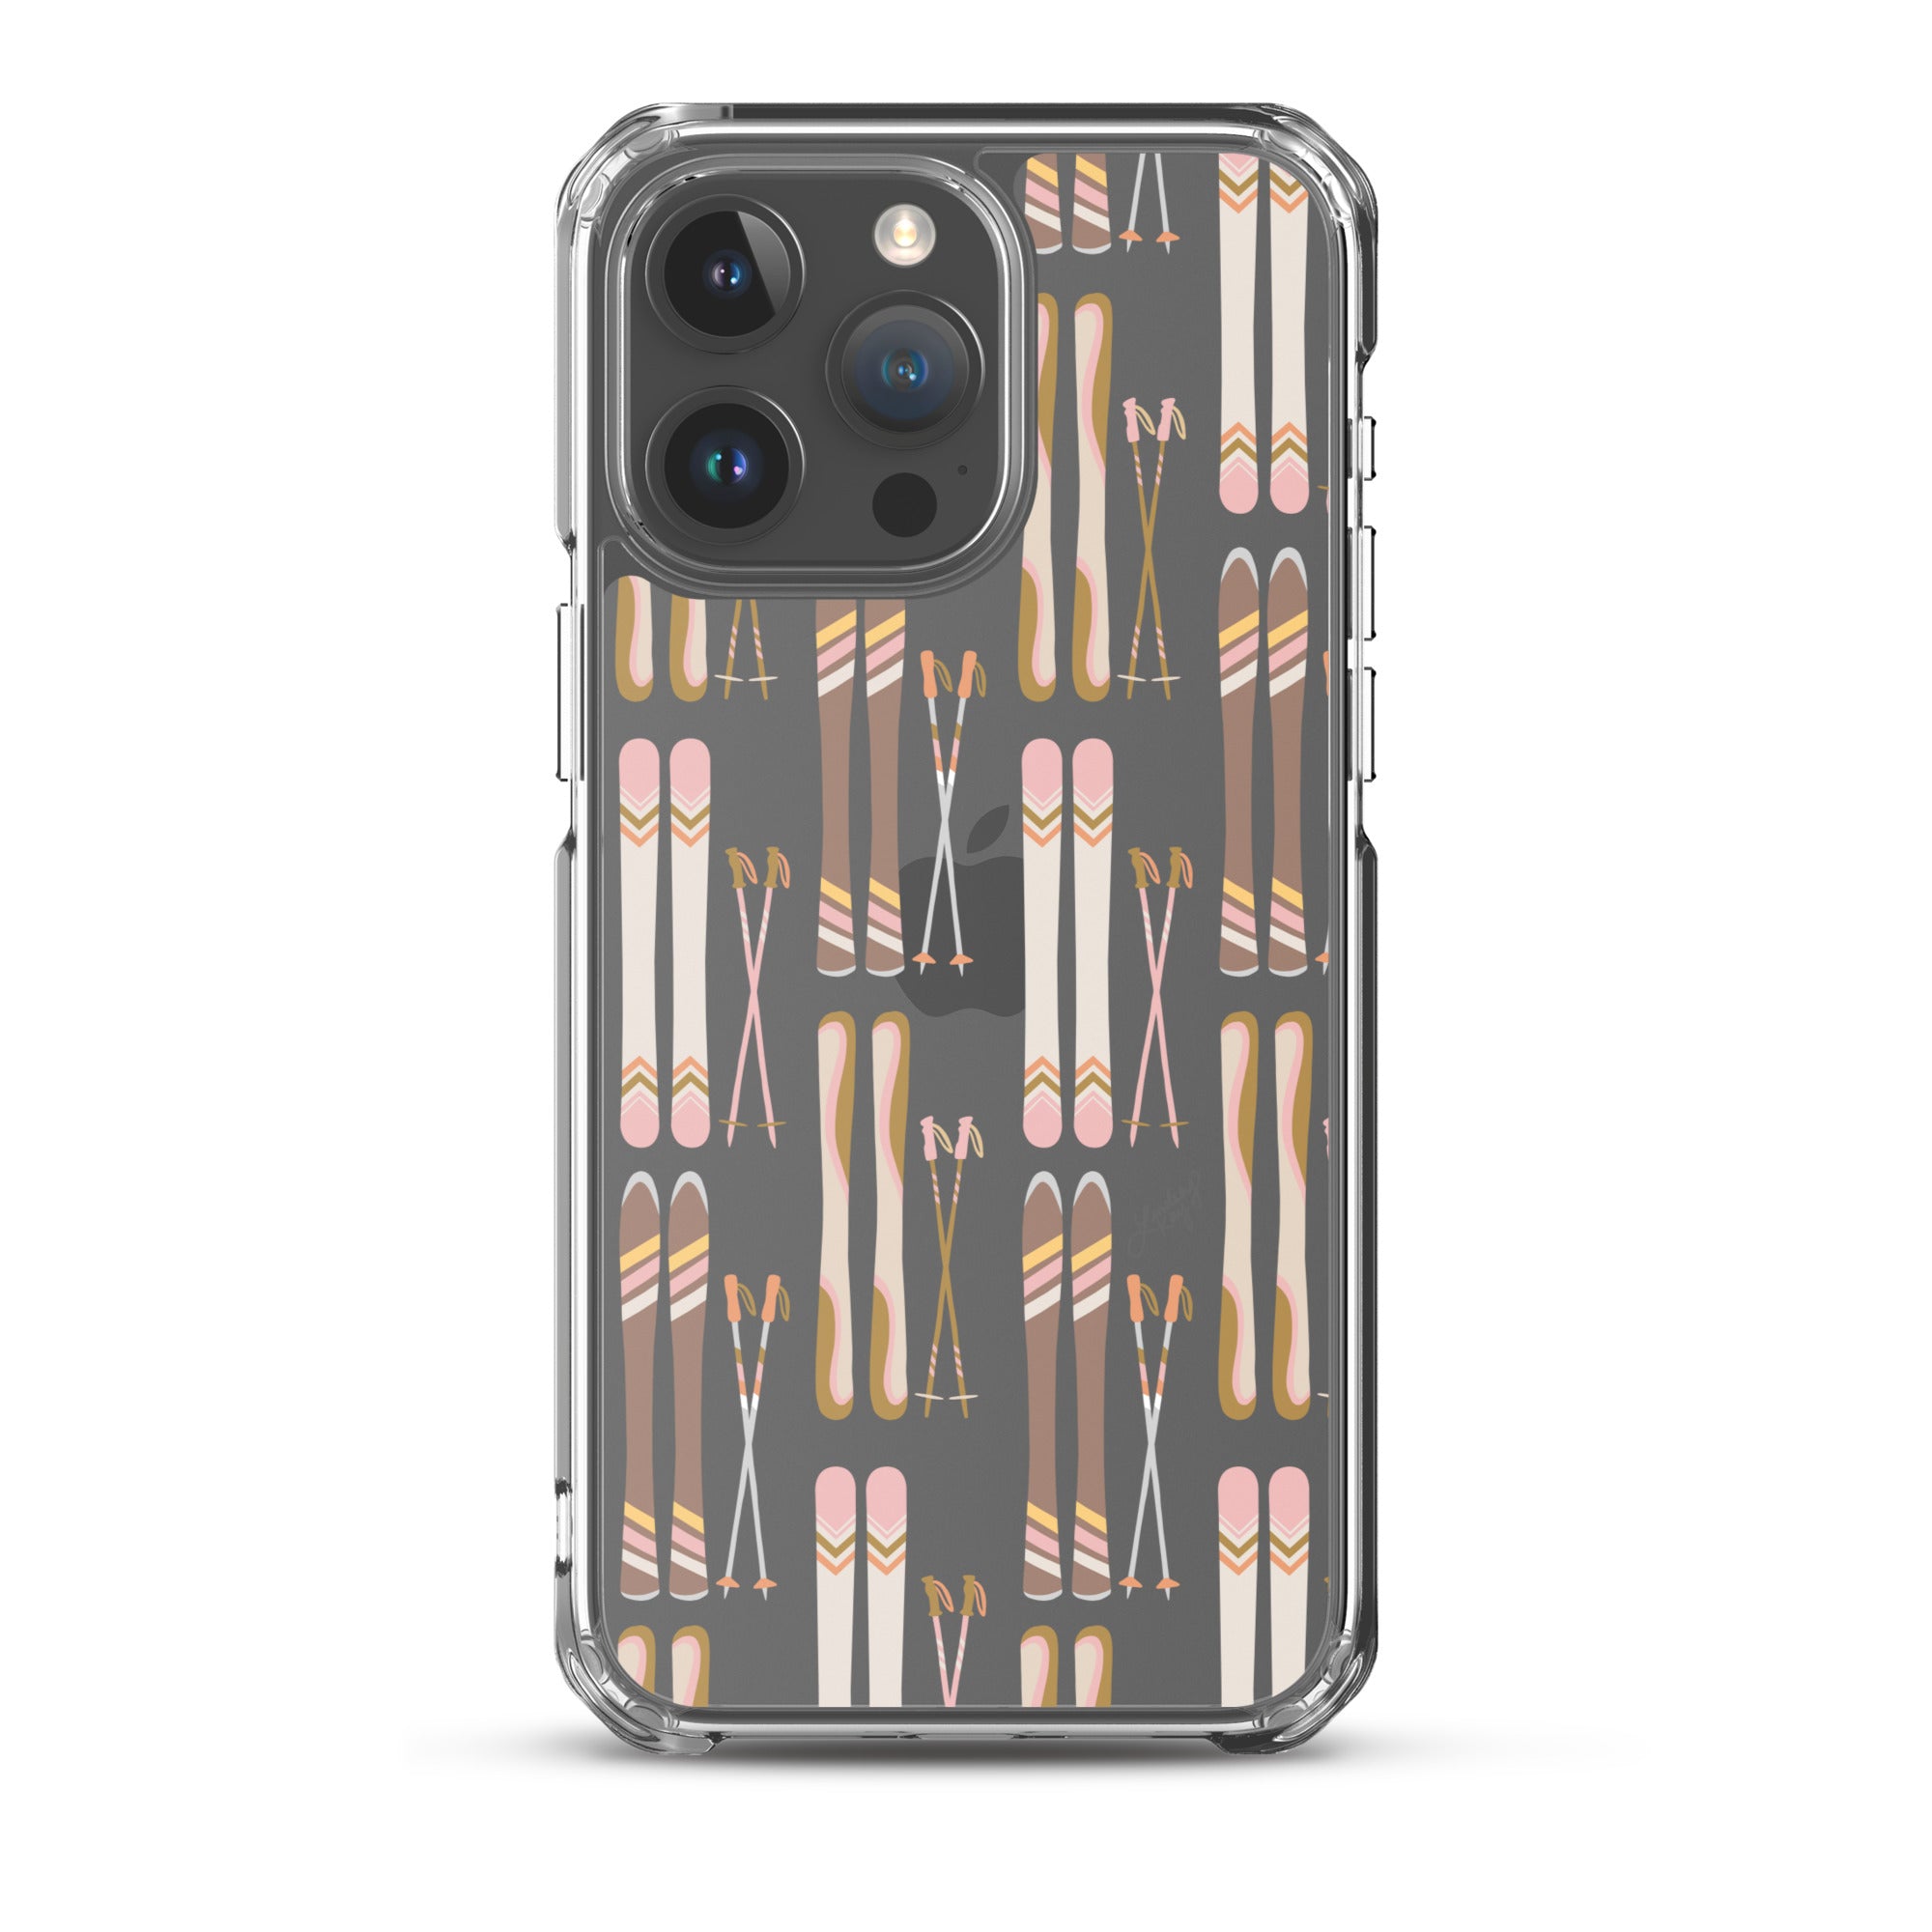 skis poles pattern illustration skier winter mountain feminine iphone-15 iphone-14 iphone-13 pro-max phone case clear over protector trendy colorado iphone mobile accessories lindsey kay collective 